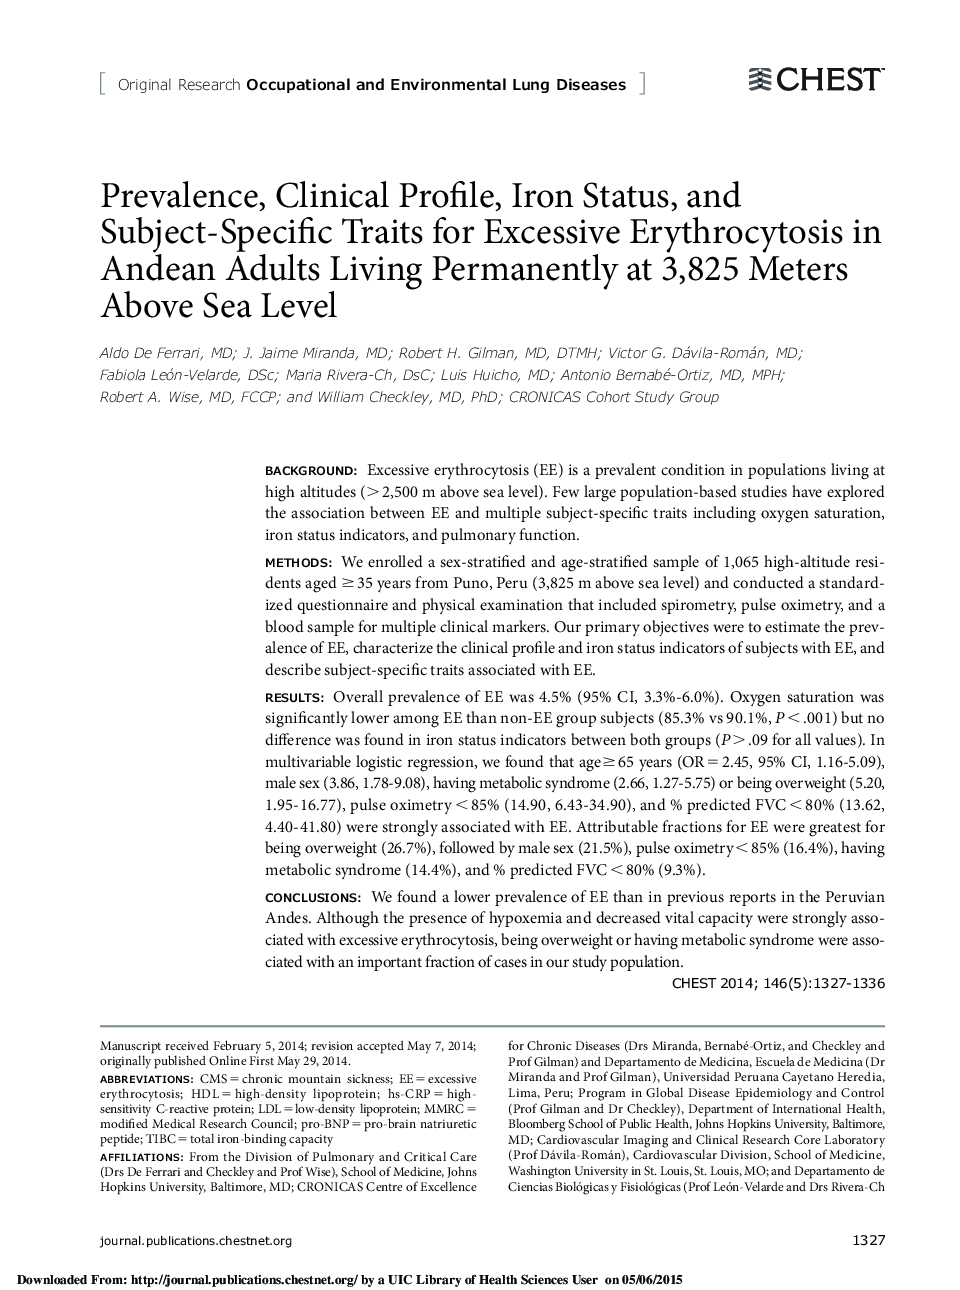 Prevalence, Clinical Profile, Iron Status, and Subject-Specific Traits for Excessive Erythrocytosis in Andean Adults Living Permanently at 3,825 Meters Above Sea Level